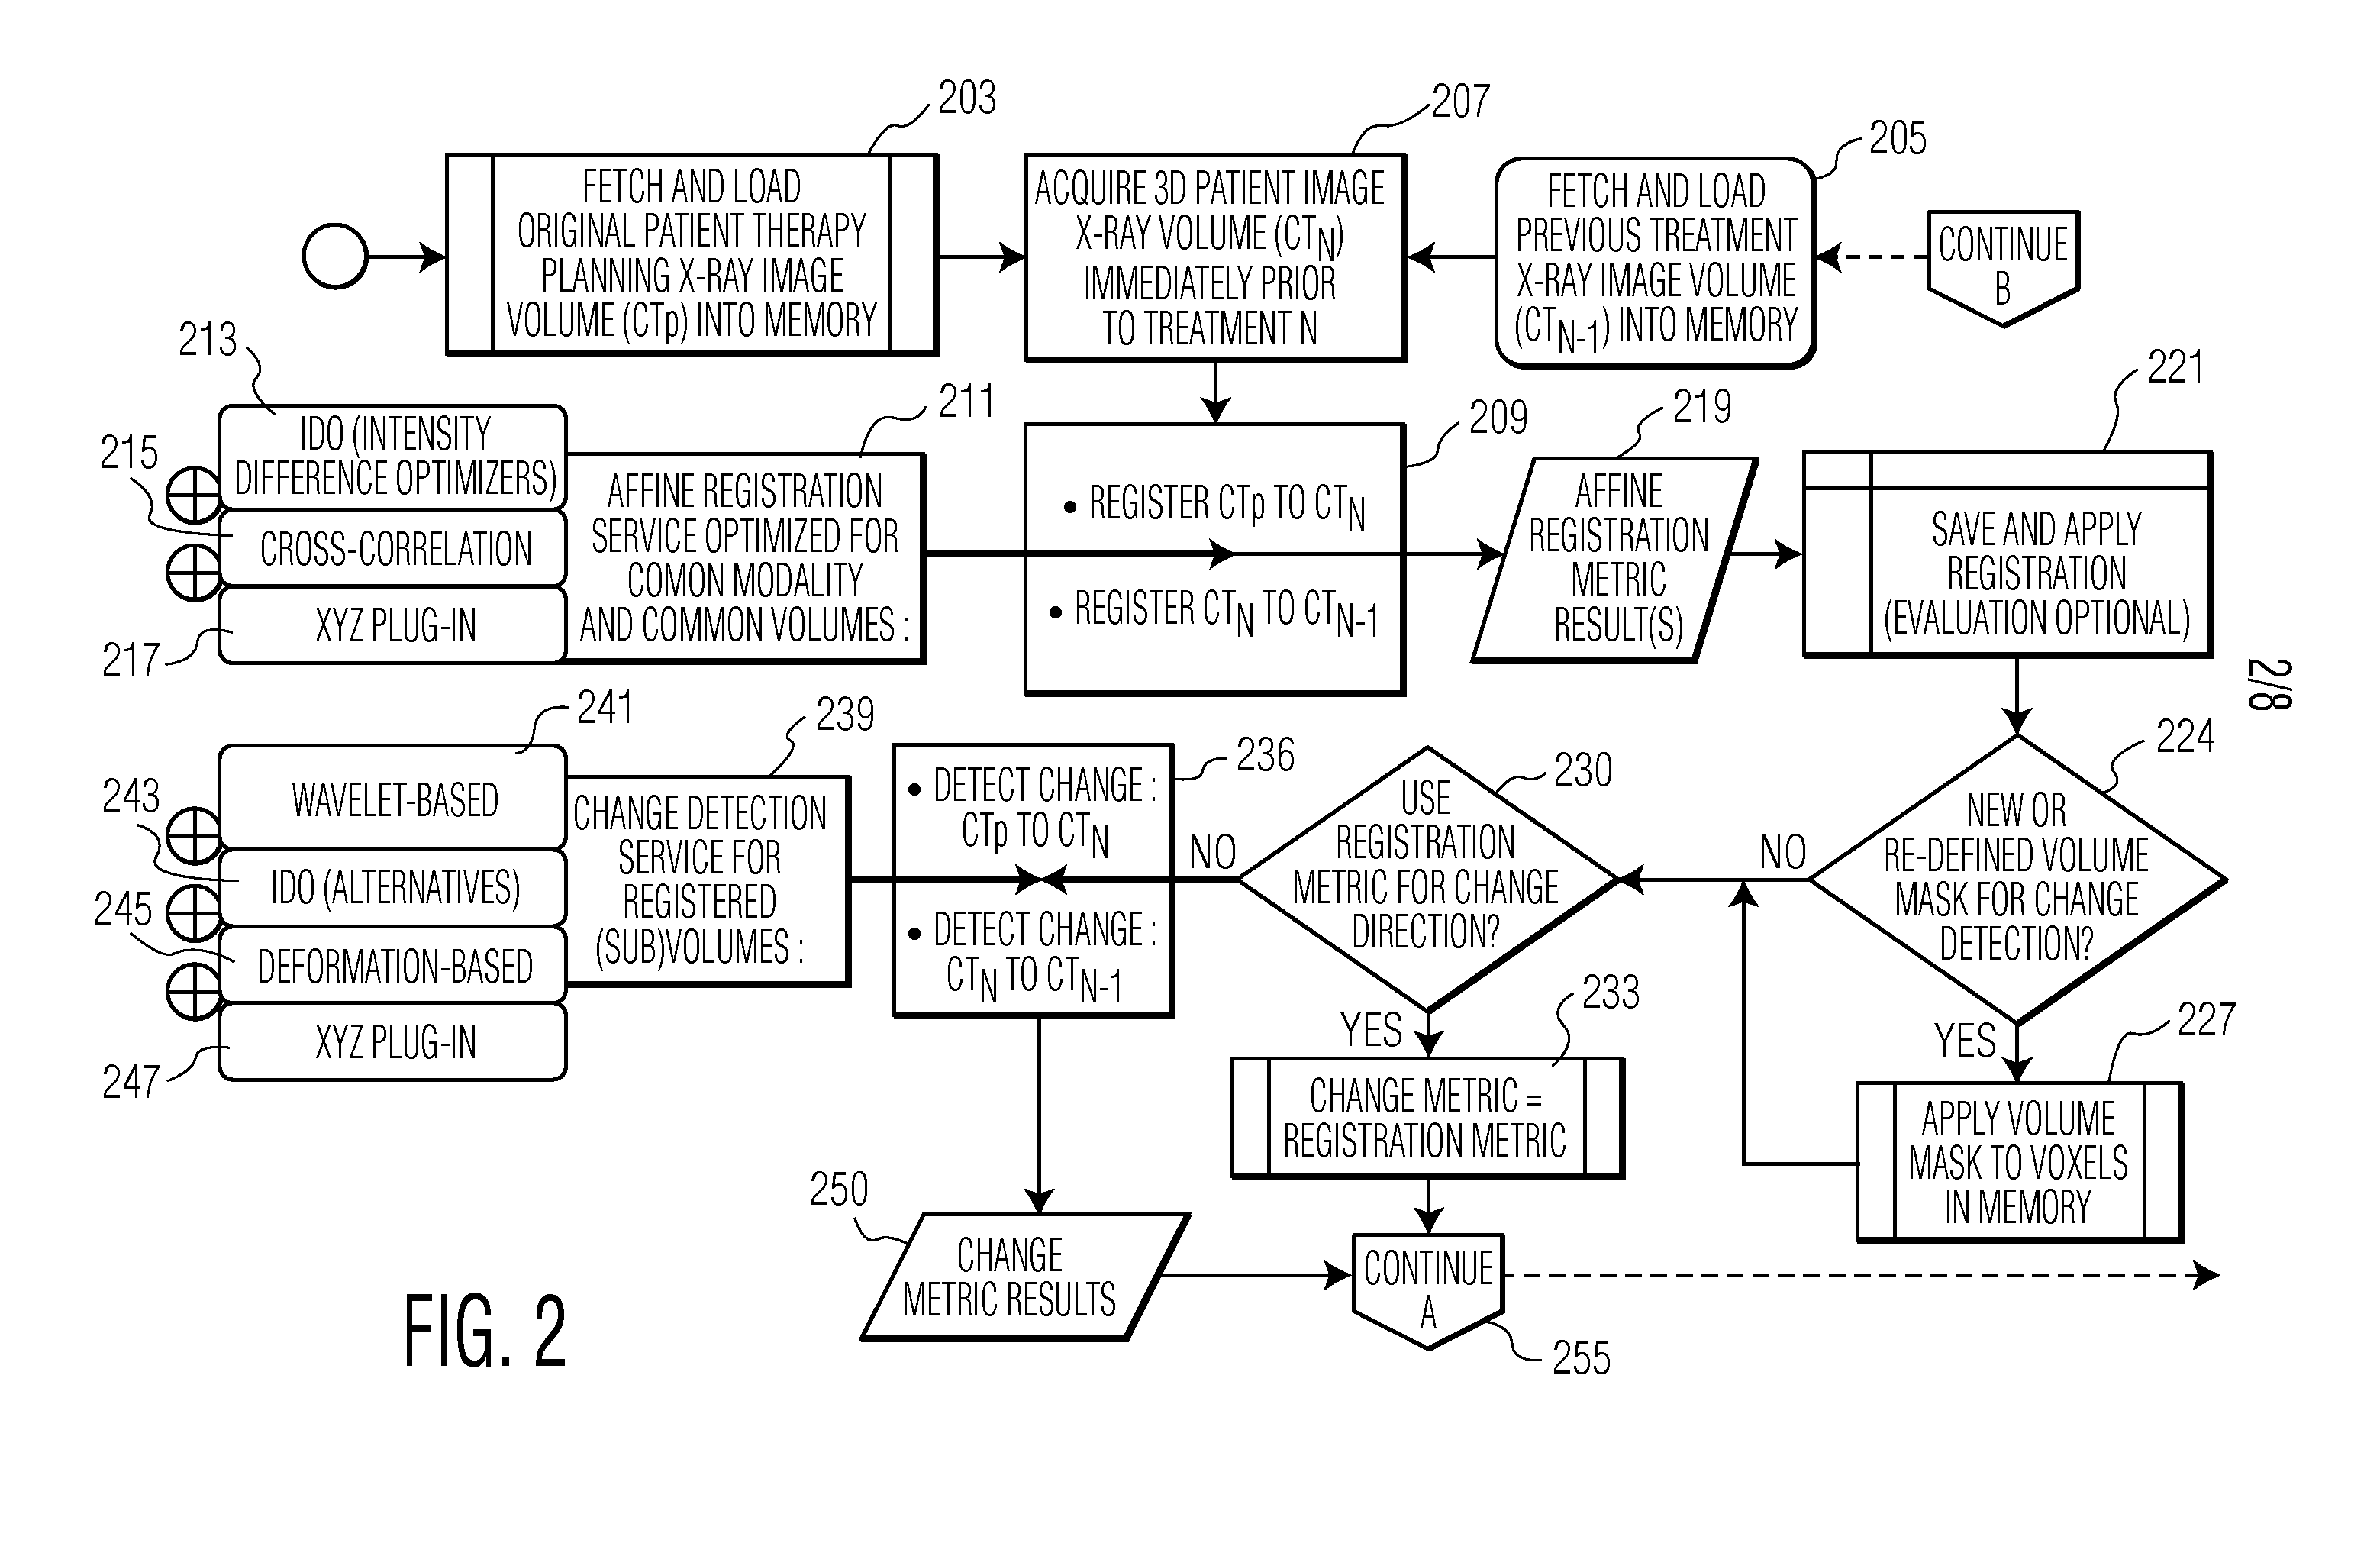 Medical Imaging Processing and Care Planning System